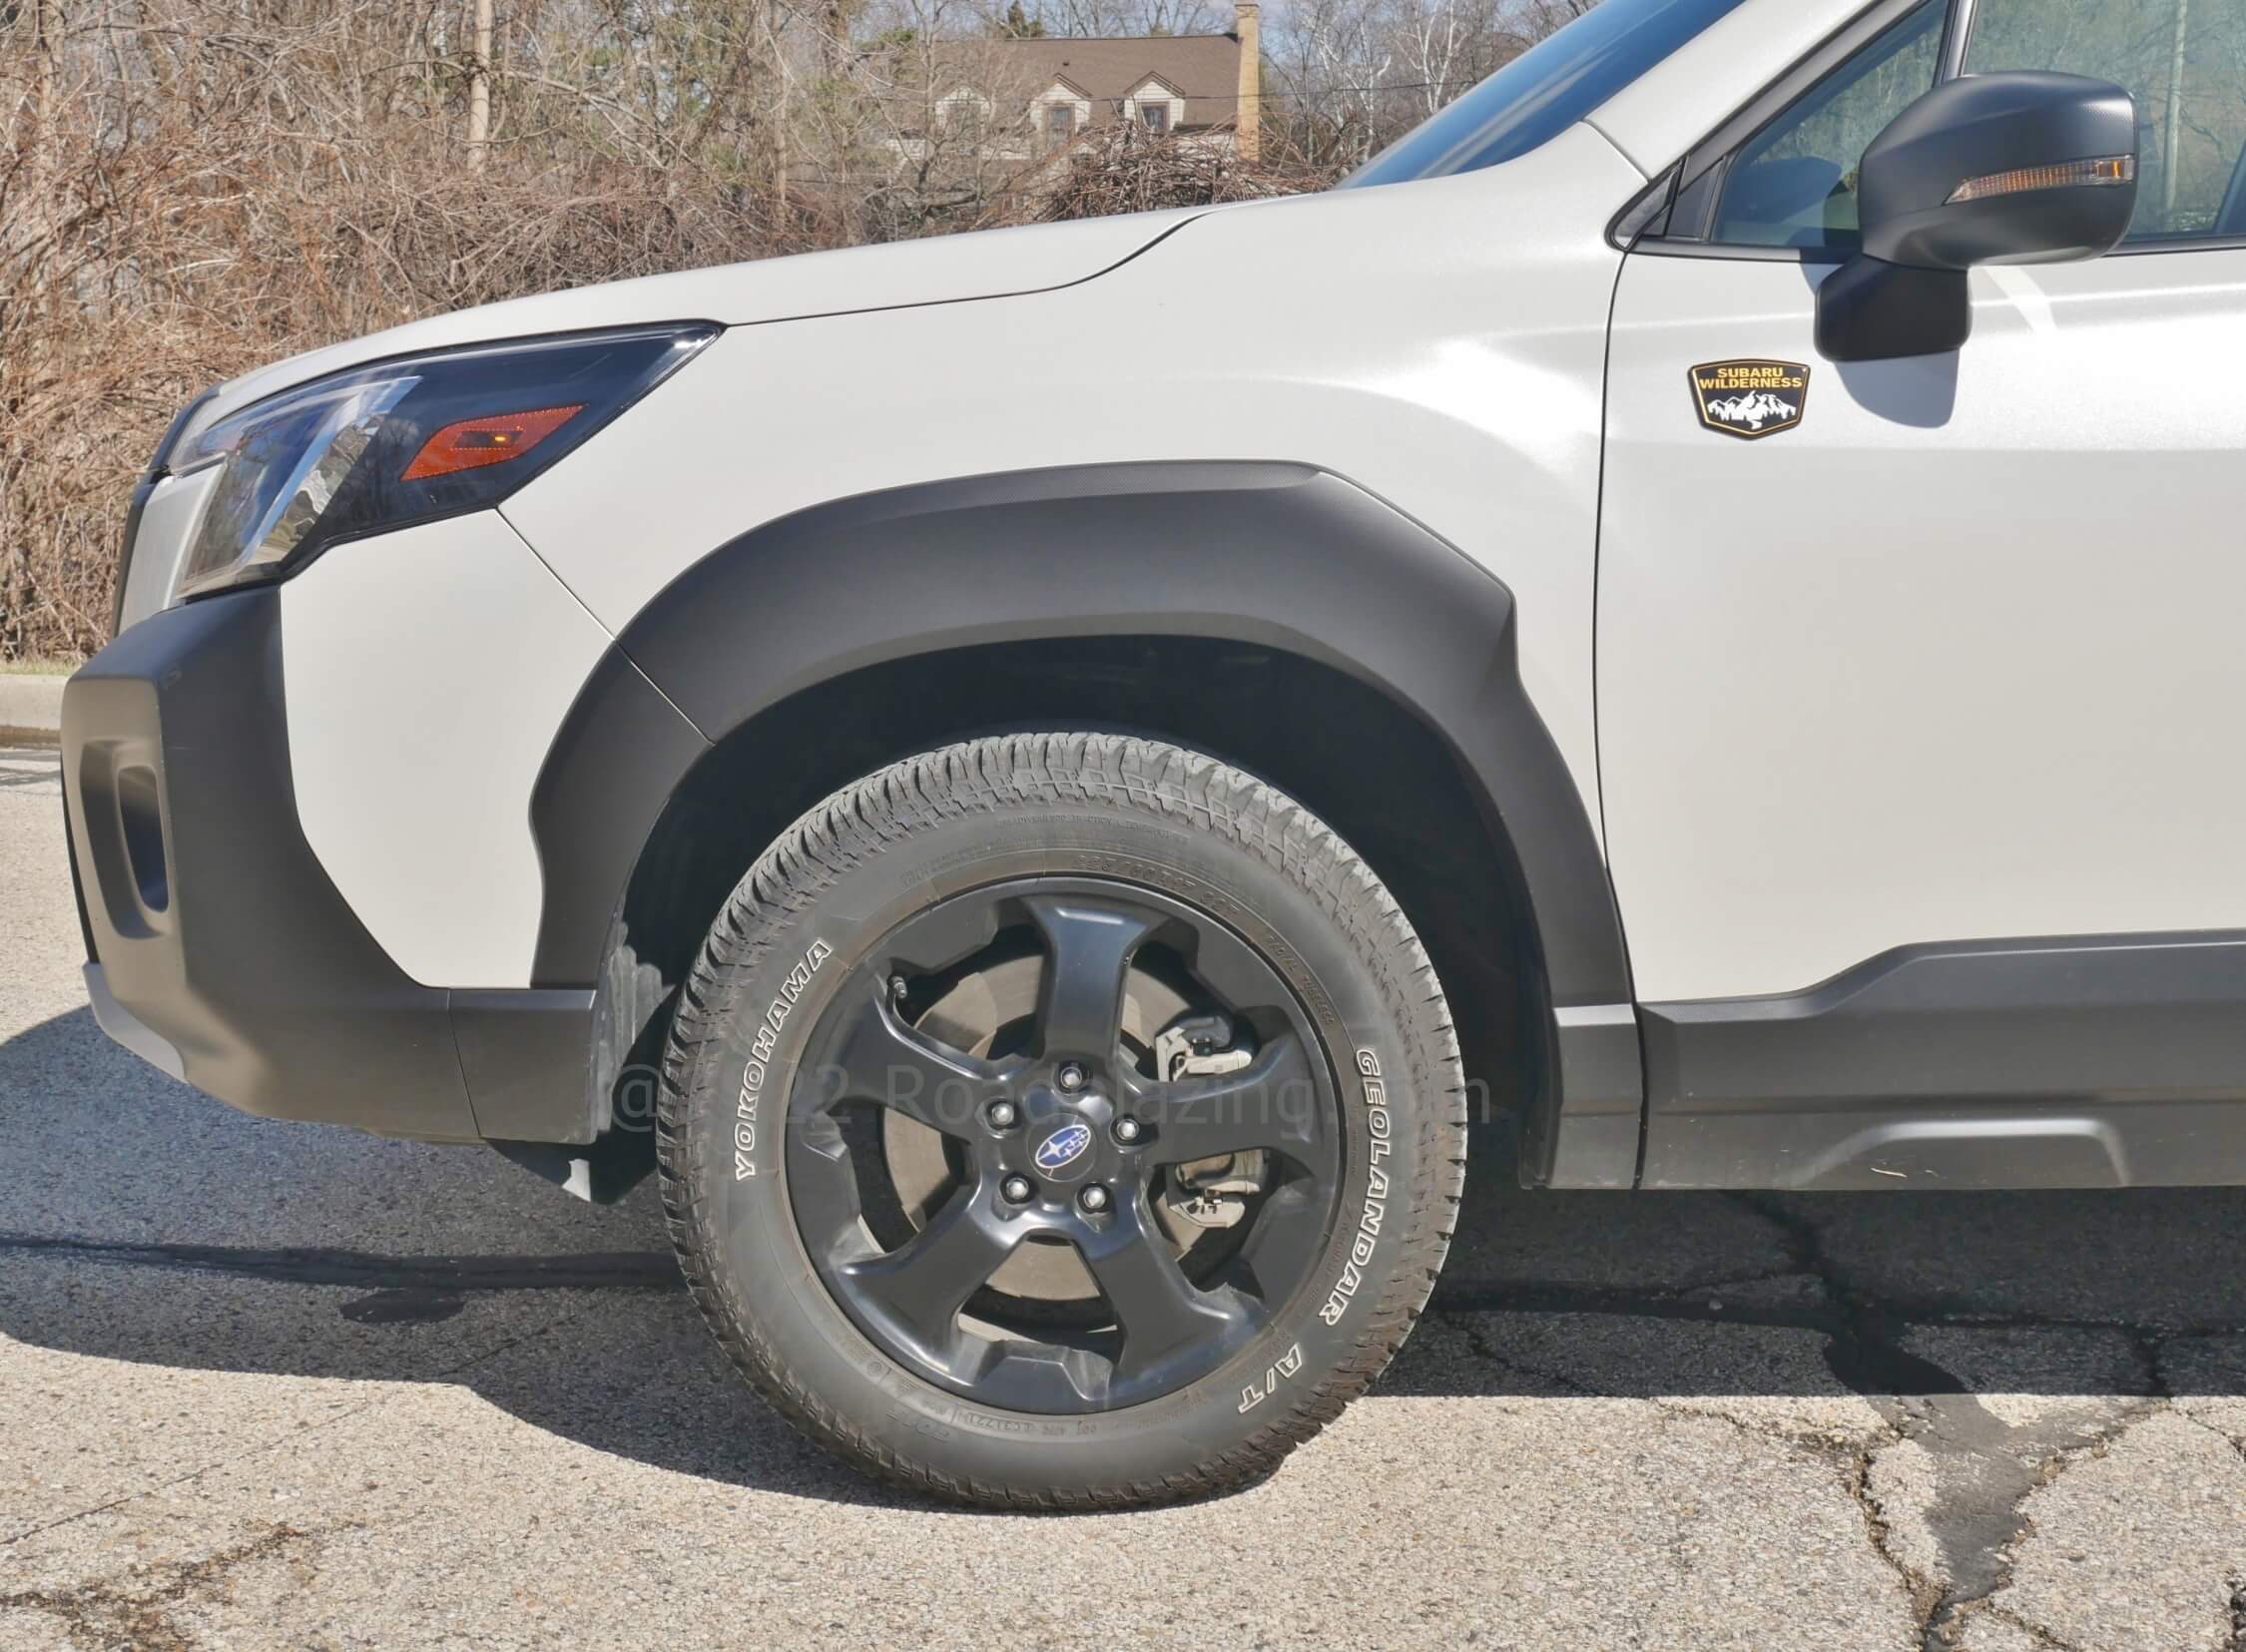 2022 Subaru Forester 2.5L Wilderness AWD: all-terrain rubber on 17" dark alloys hum slightly on an utterly compliant independent suspension